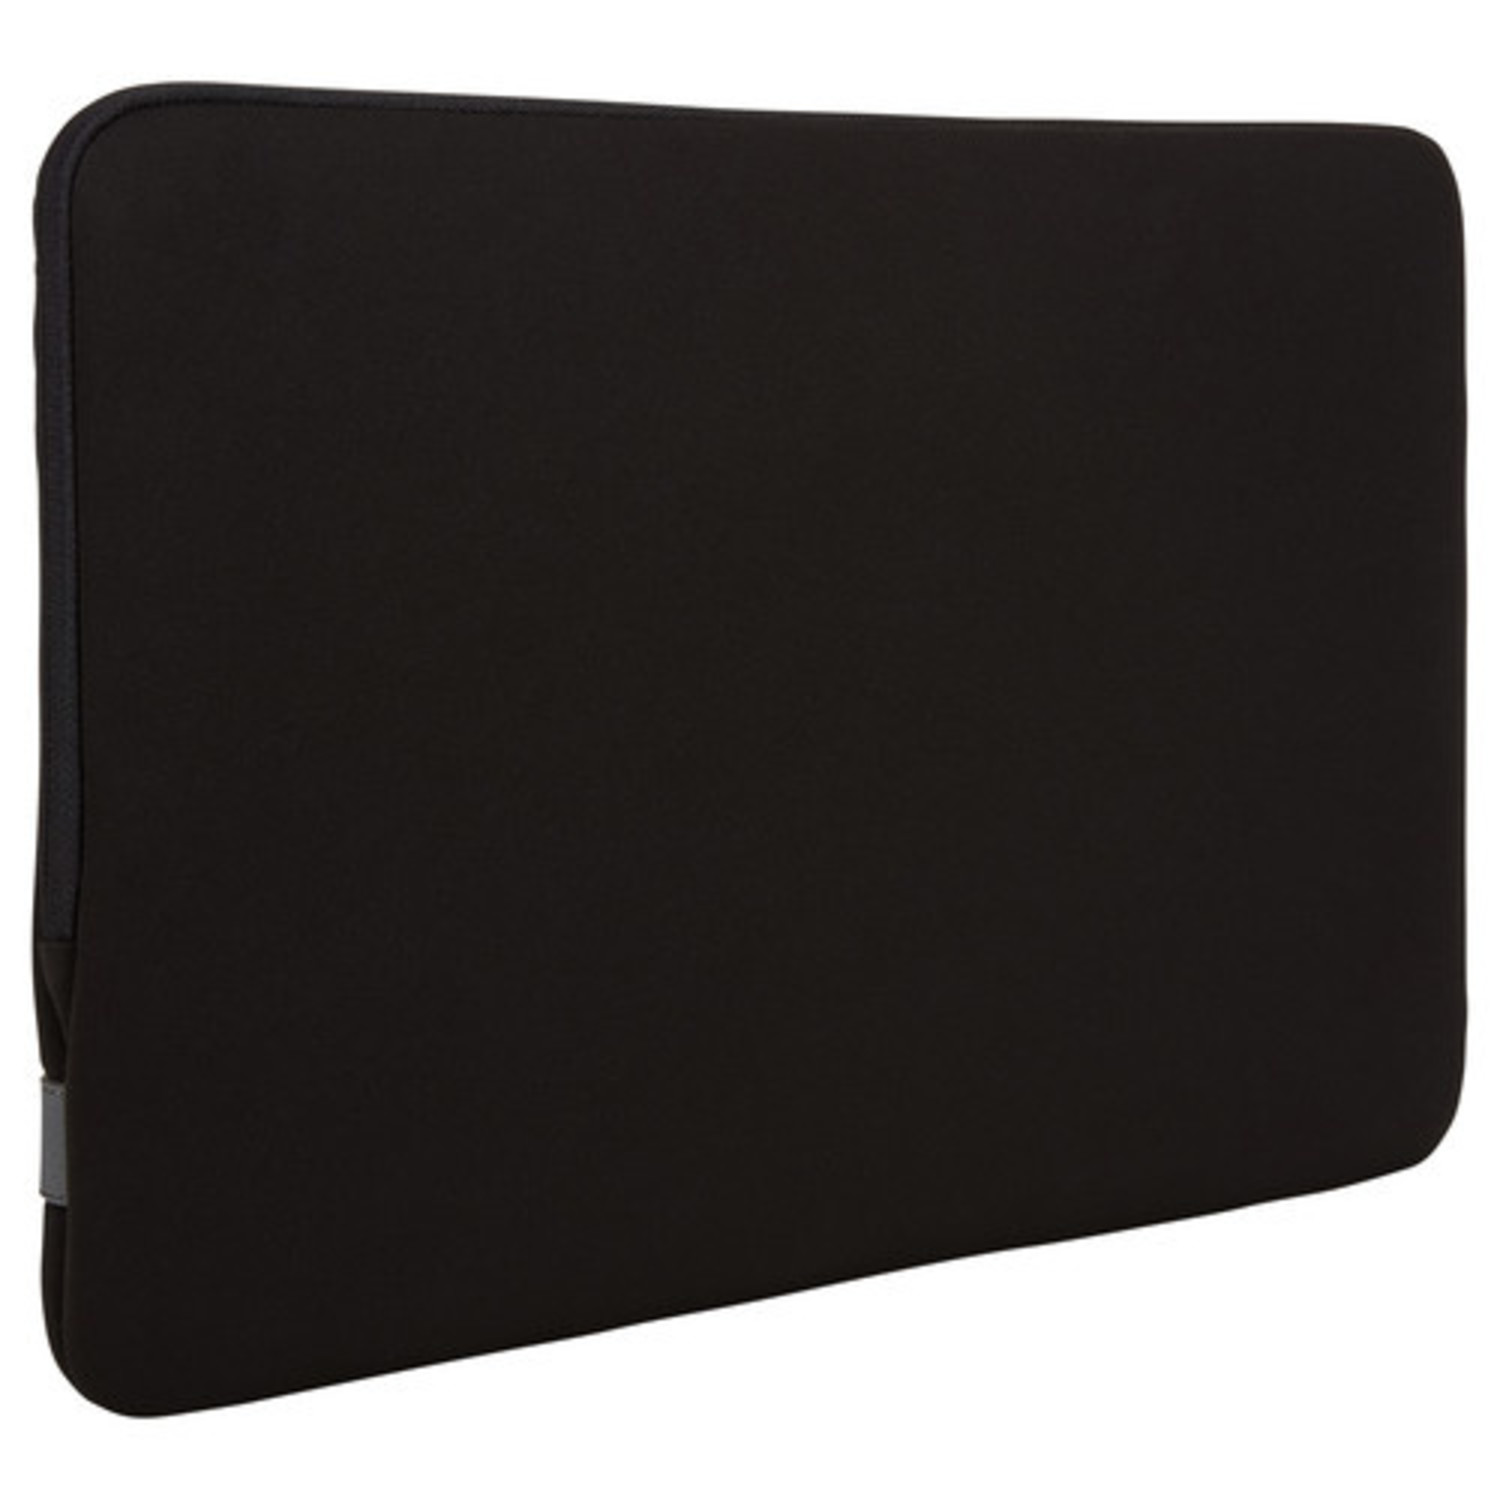 Case Logic Reflect 16-inch Laptop Sleeve - Black - Campus Computer Store